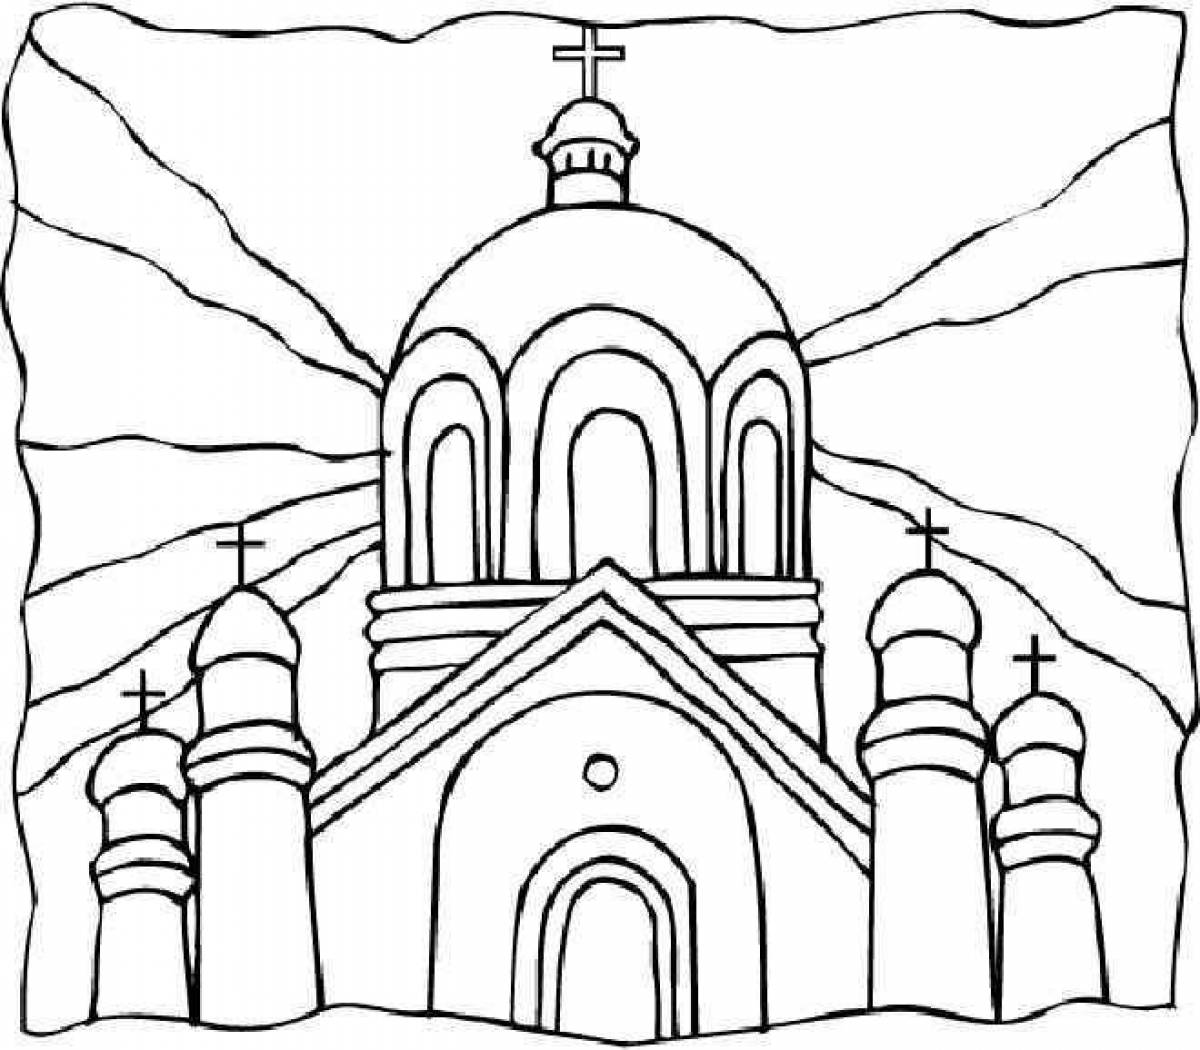 Glorious church coloring book for kids